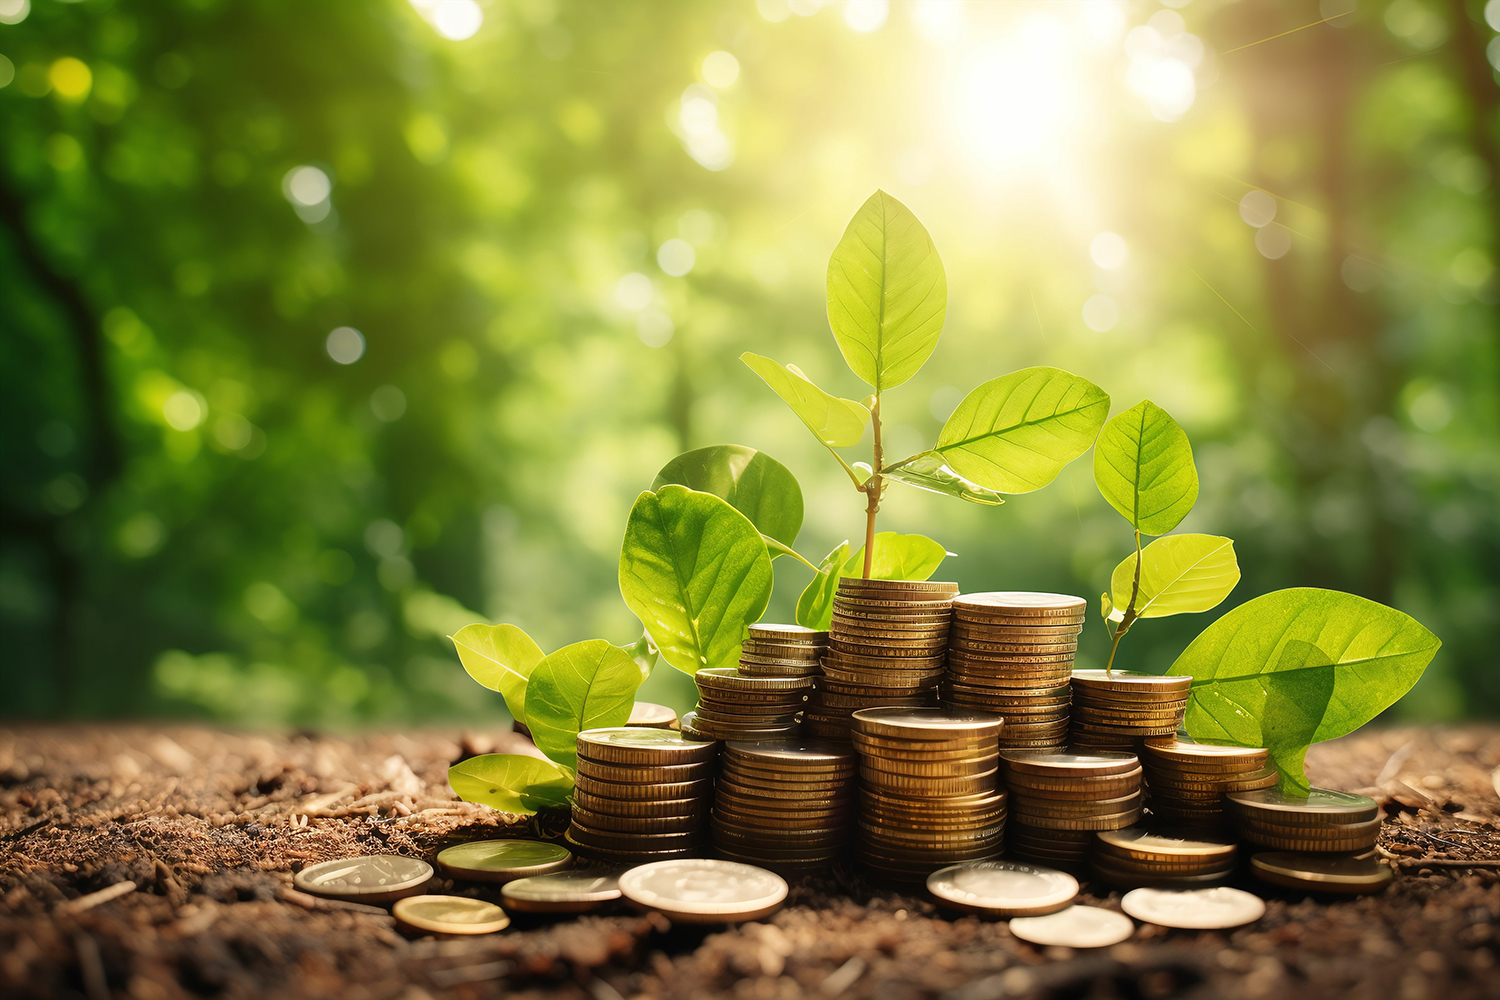 sustainable finance and green finance, symbolizing growth, money